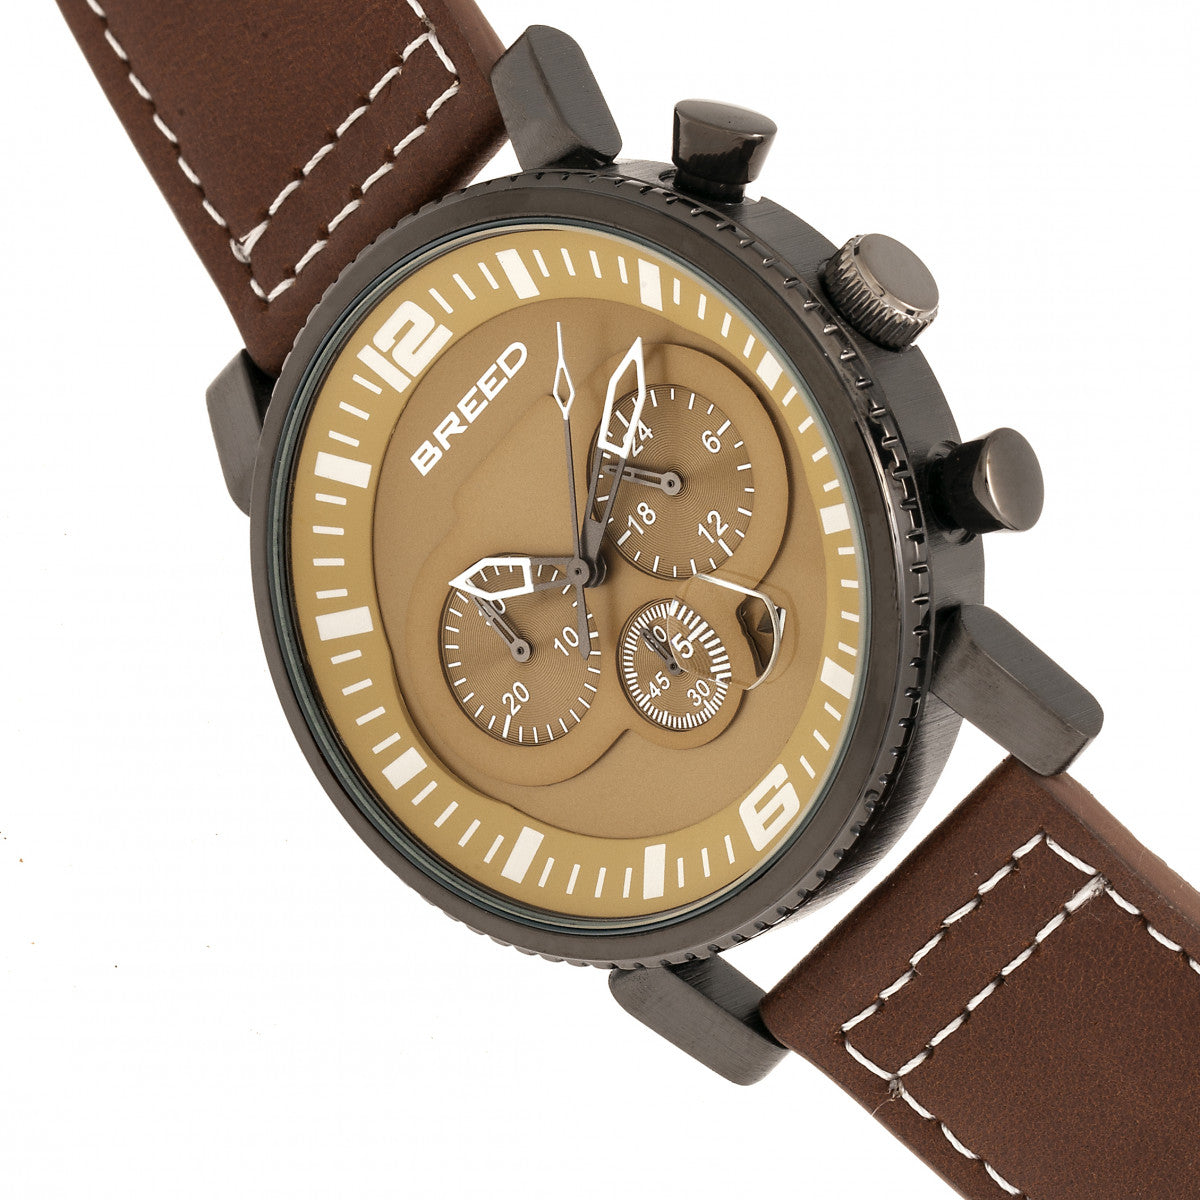 Breed Ryker Chronograph Leather-Band Watch w/Date - Brown/Camel - BRD8205